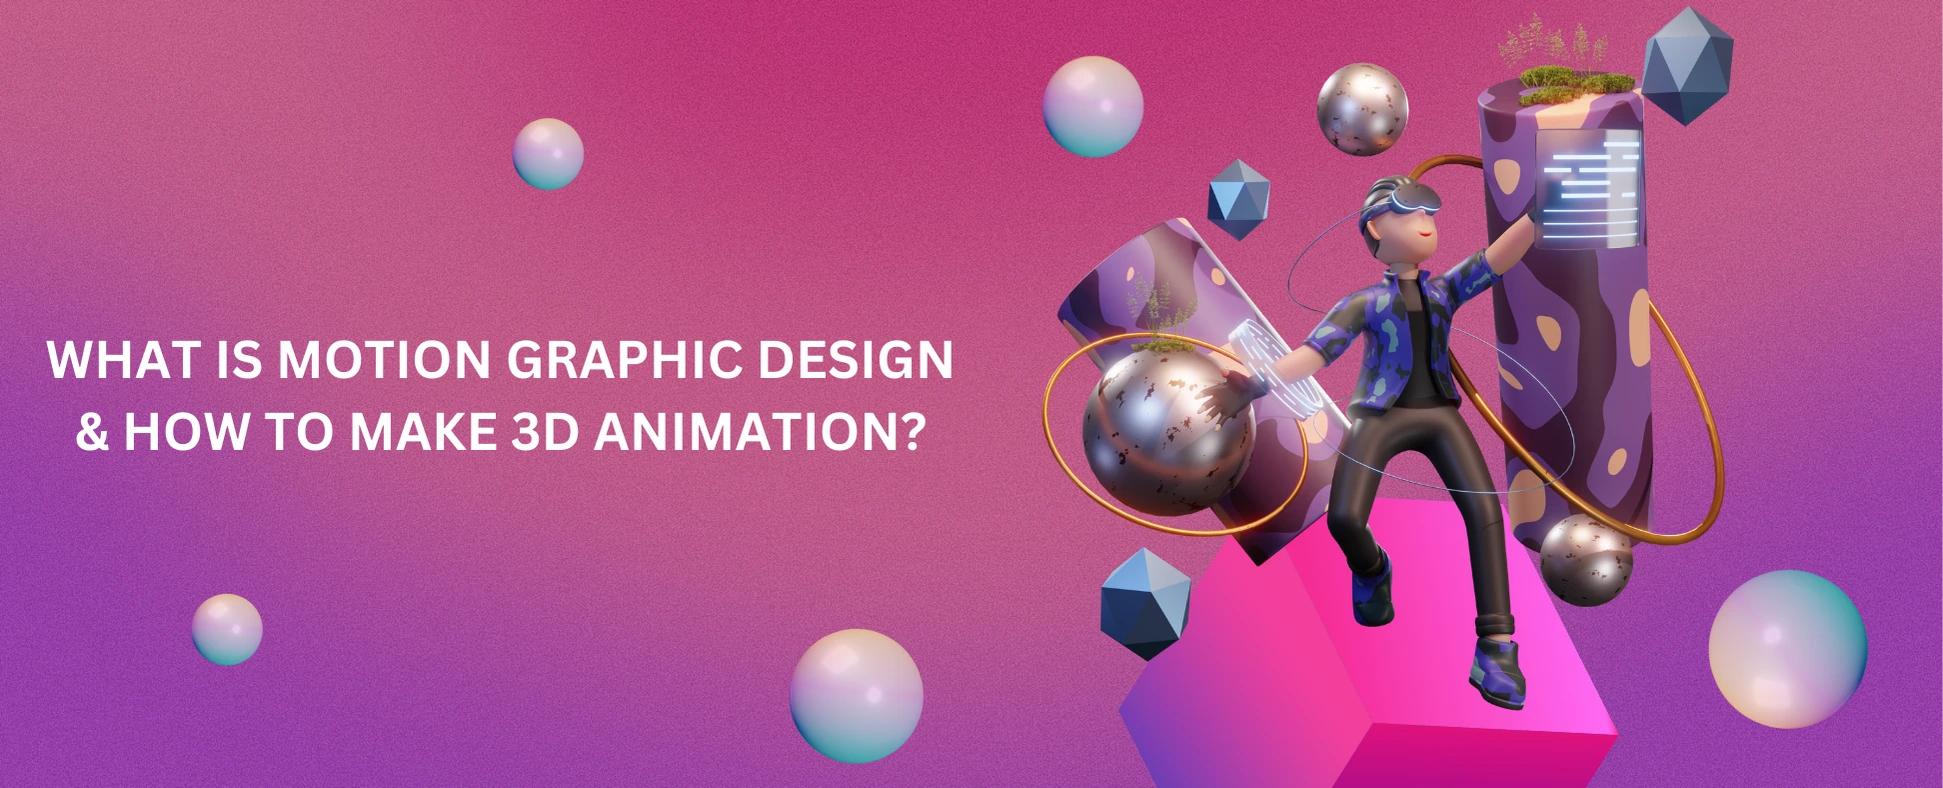 What is Graphic Motion?